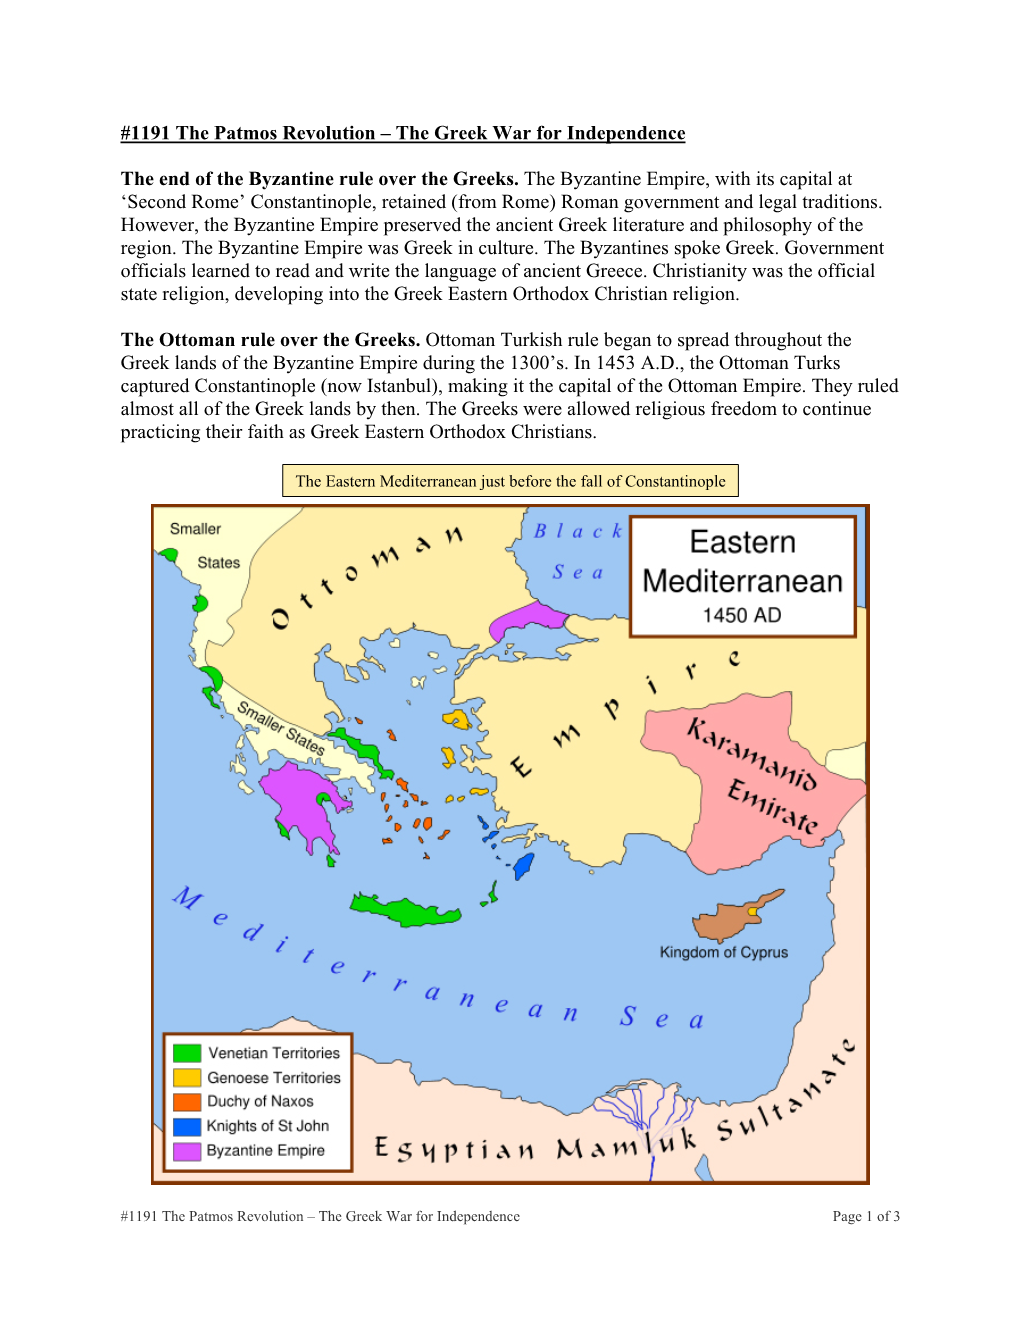 1191 the Patmos Revolution – the Greek War for Independence